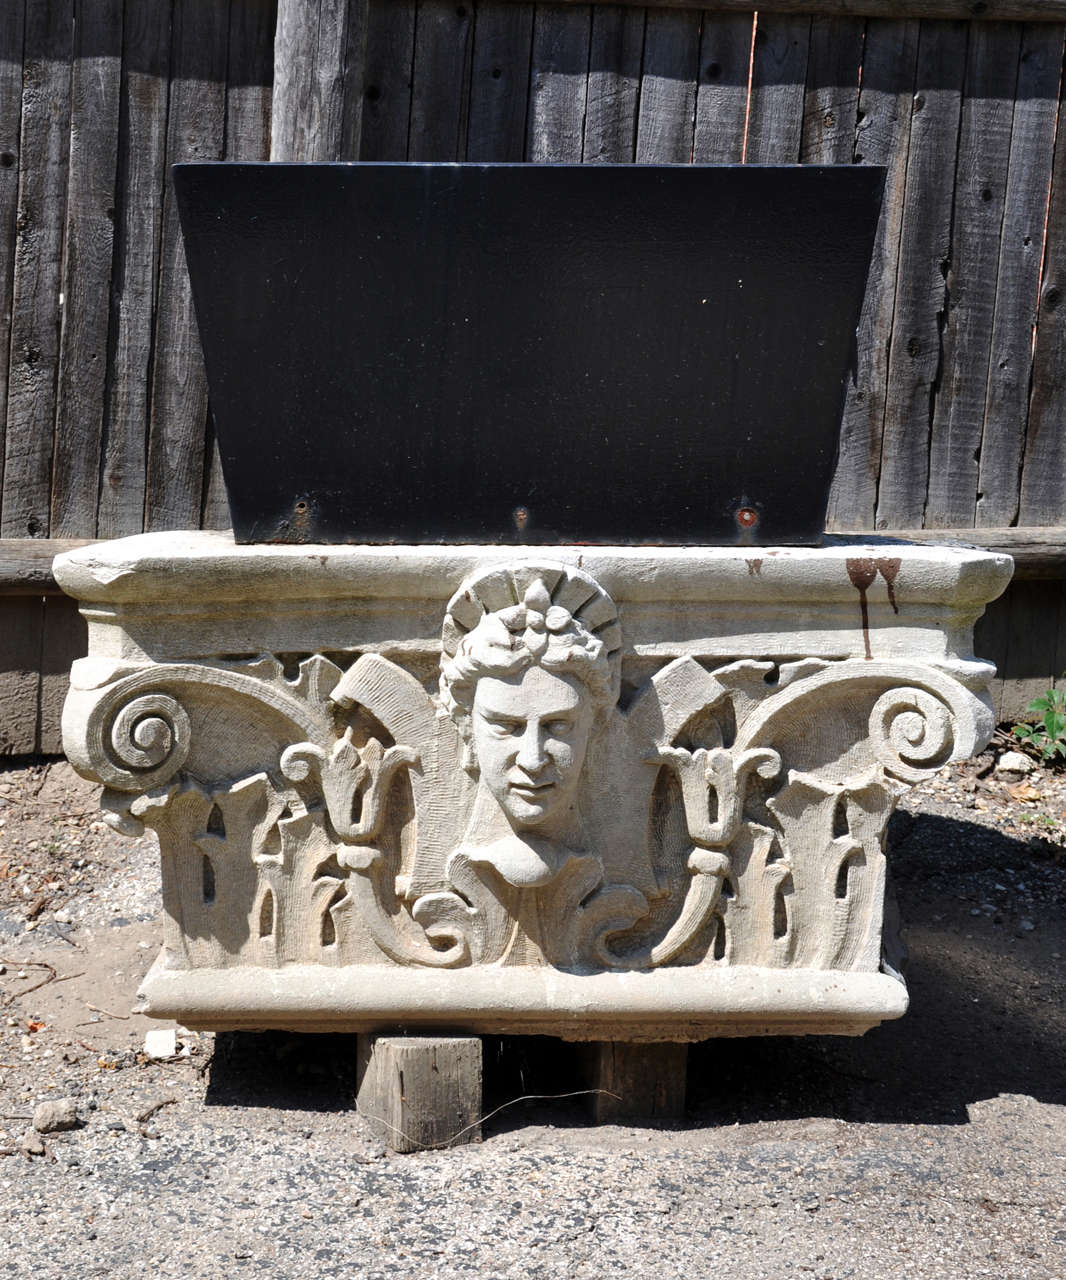 A Stone Archectural Capital / Planter with central female bust from an unknown Chicago area building, Circa 1900 with attached metal planter. Planter measures: Height: 14 in., Width: 26 in. Depth: 28 in